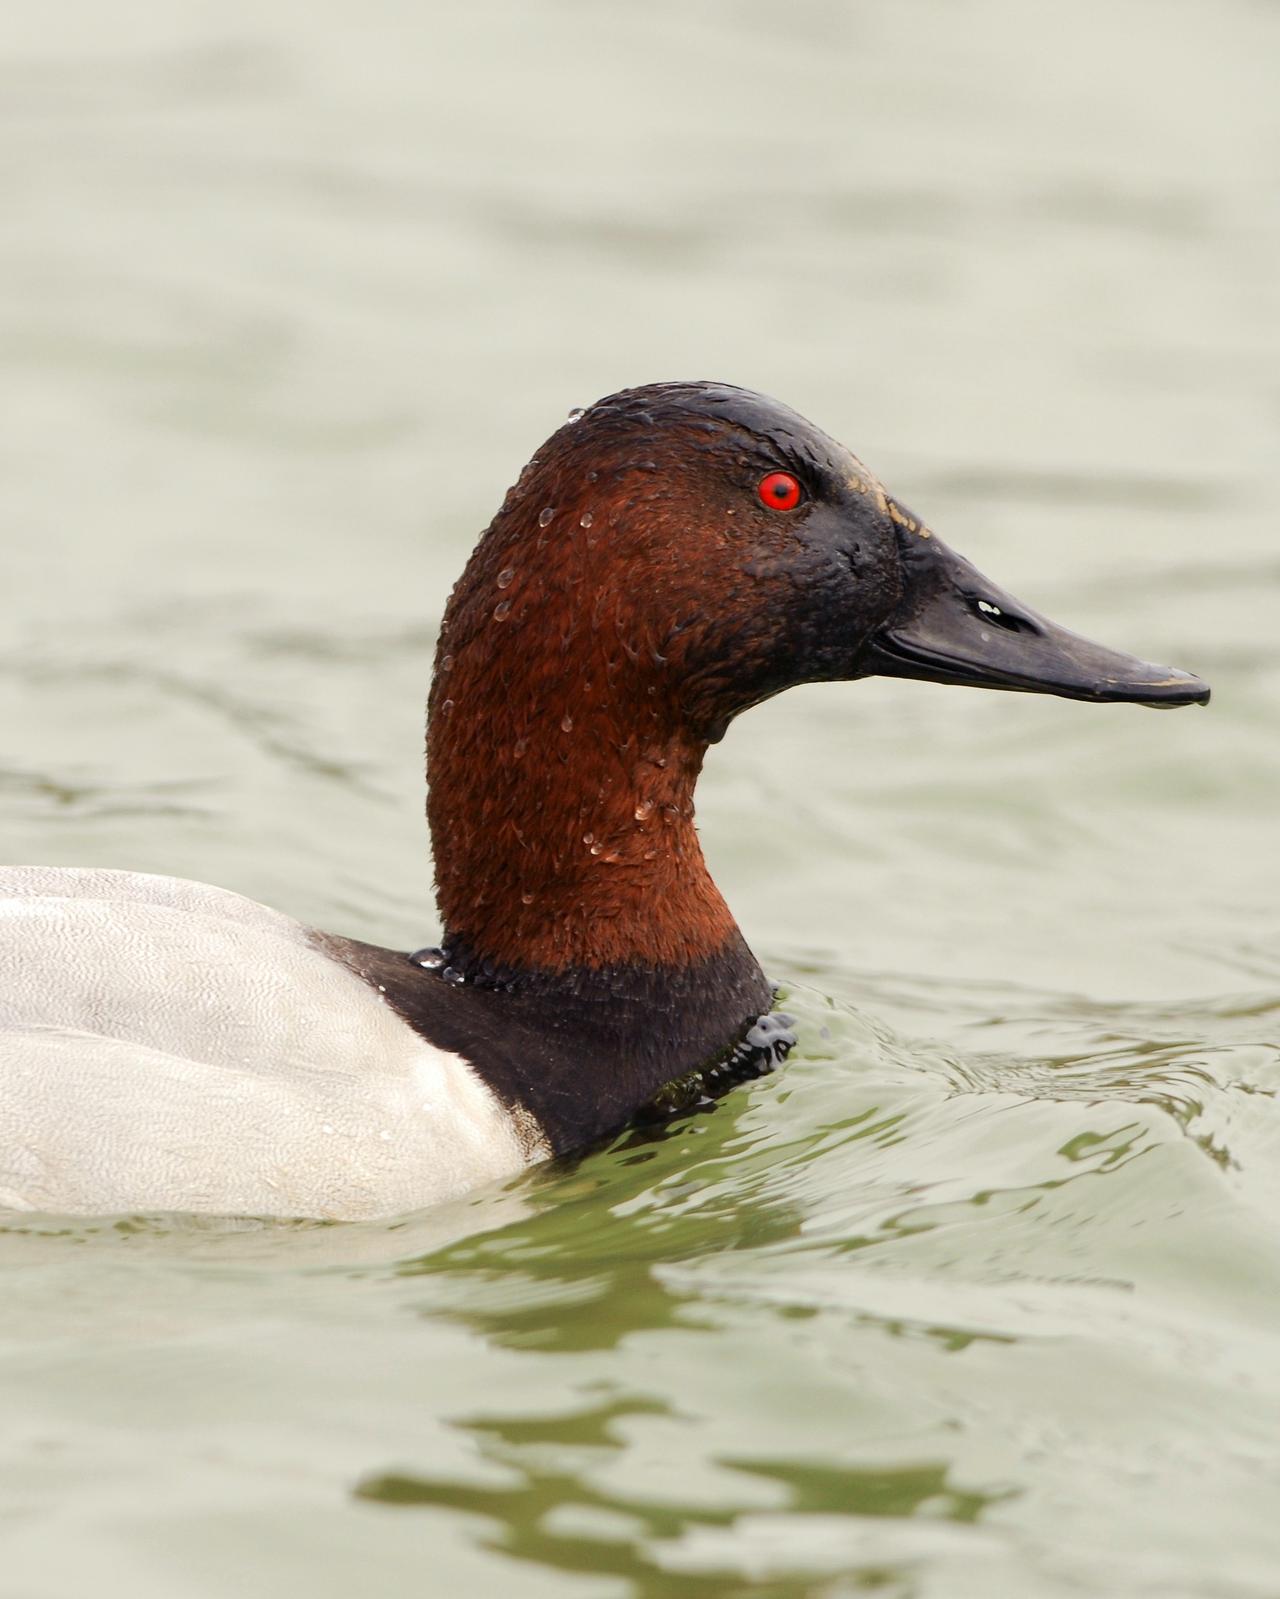 Canvasback Photo by David Hollie